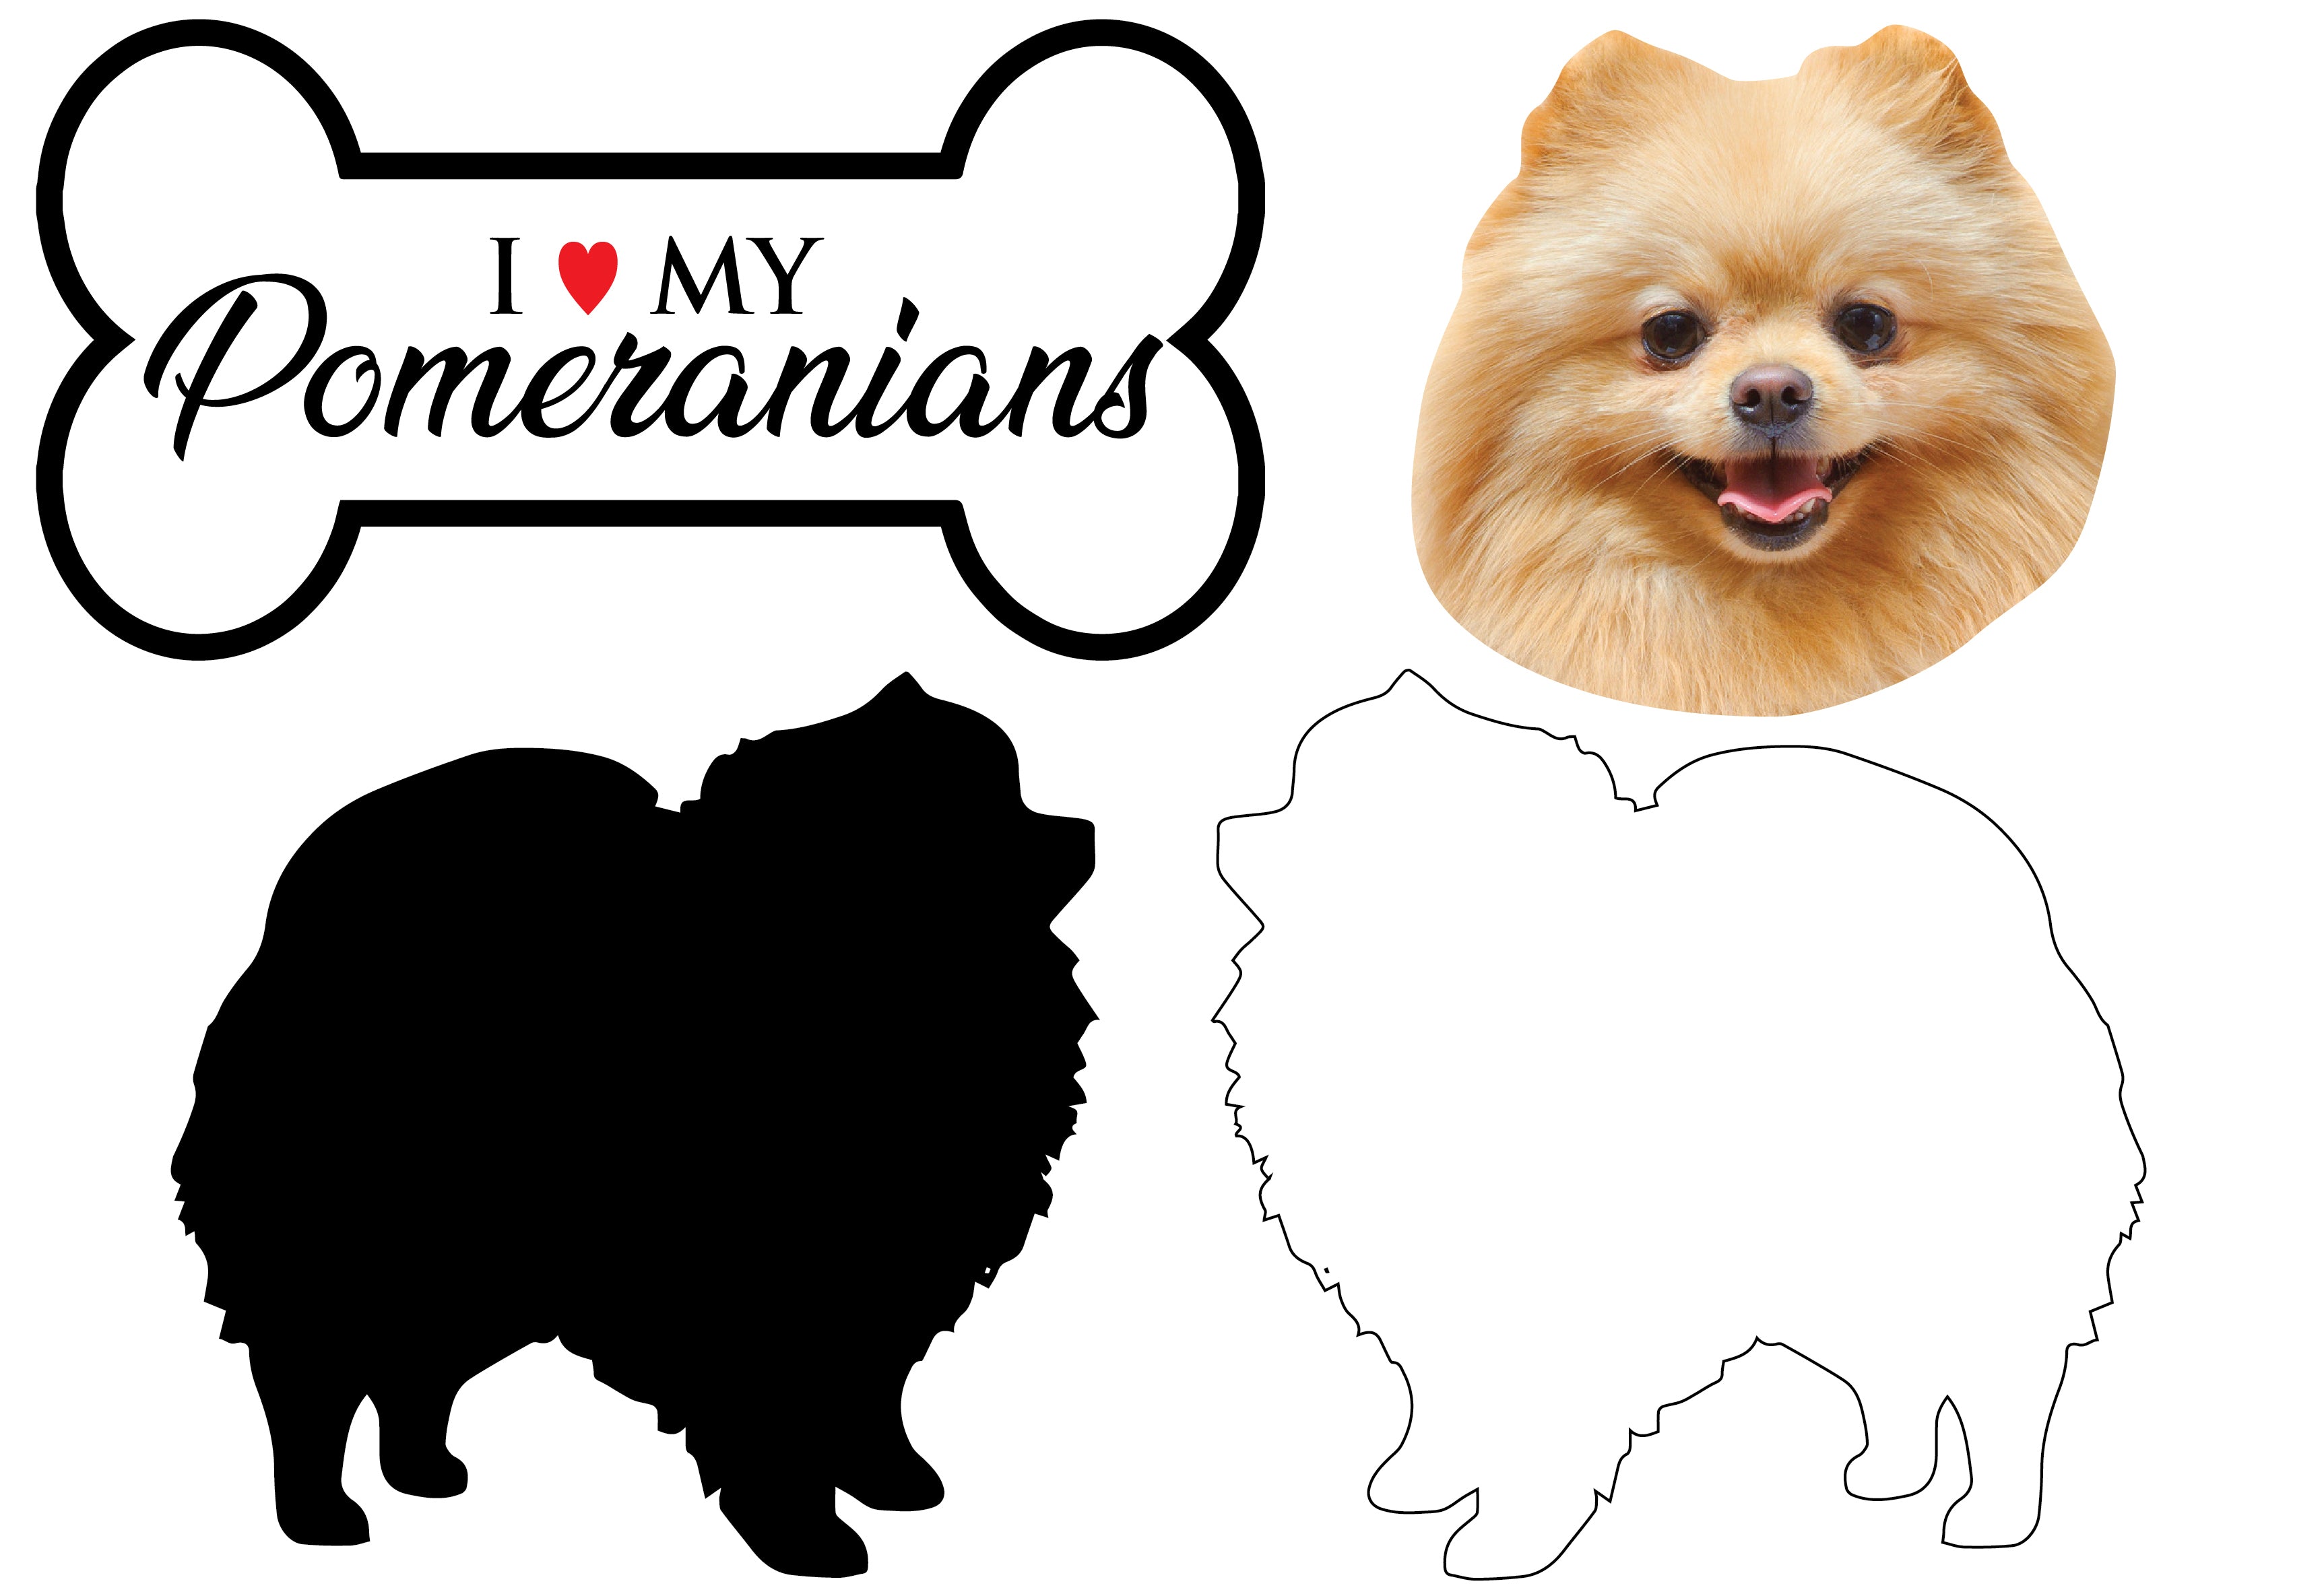 Pomeranian - Dog Breed Decals (Set of 16) - Sizes in Description